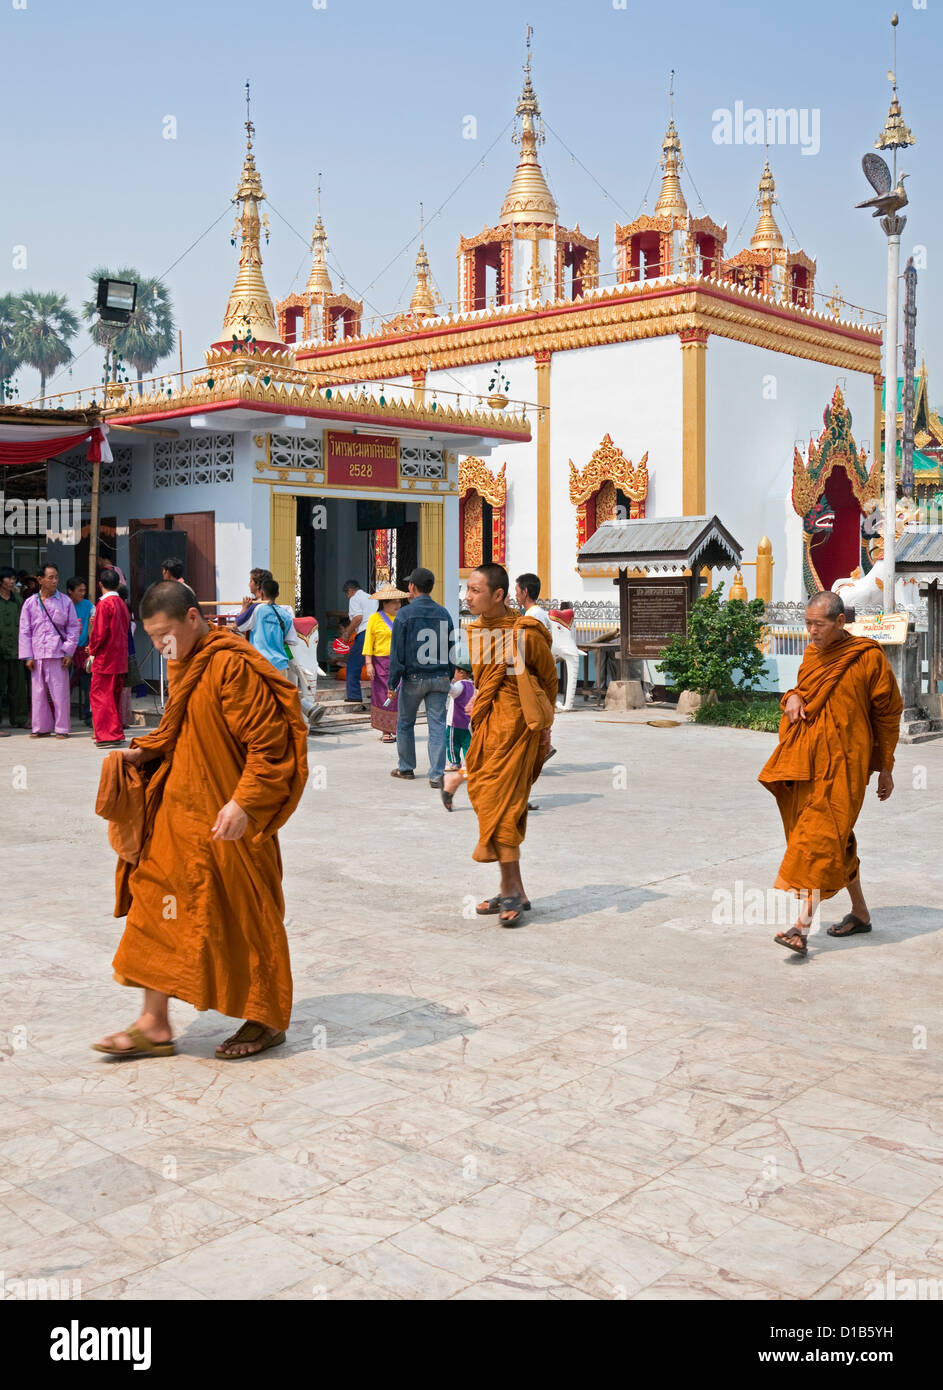 Monks taking part in 'Poy Sang Long' festival where young novice monks are ordained, Wat Jong Klang, Mae Hong Son, Thailand Stock Photo